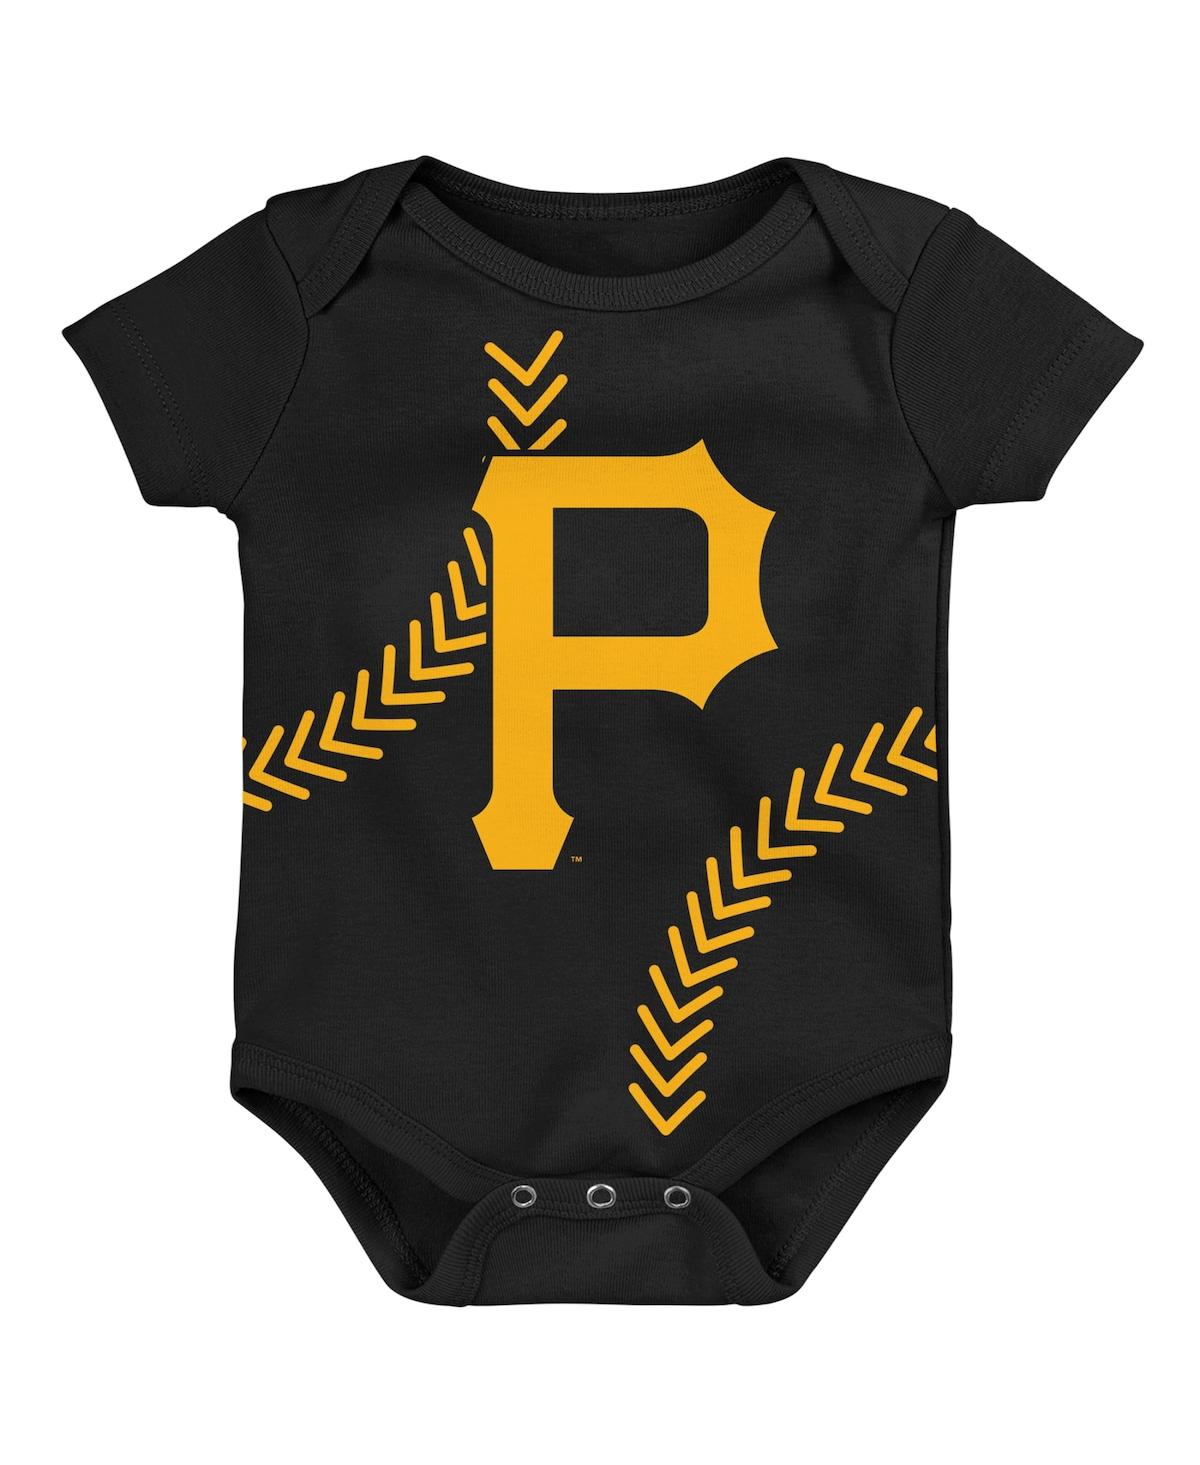 Outerstuff Babies' Newborn And Infant Boys And Girls Black Pittsburgh Pirates Running Home Bodysuit